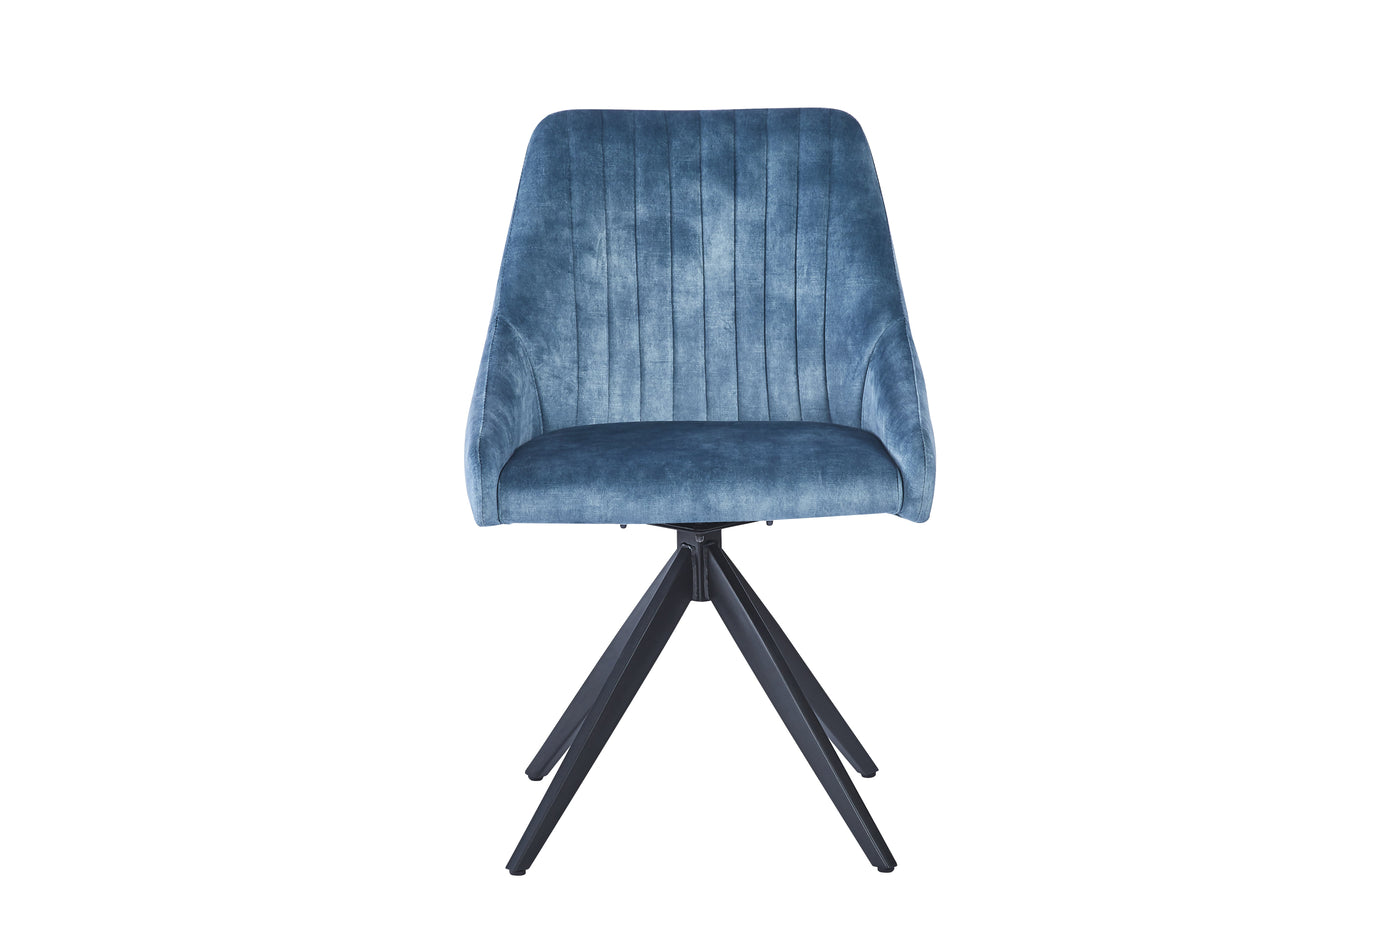 Giorgio Swivel Velvet Dining Chairs With Black Metal Base in 3 Colours - Pairs